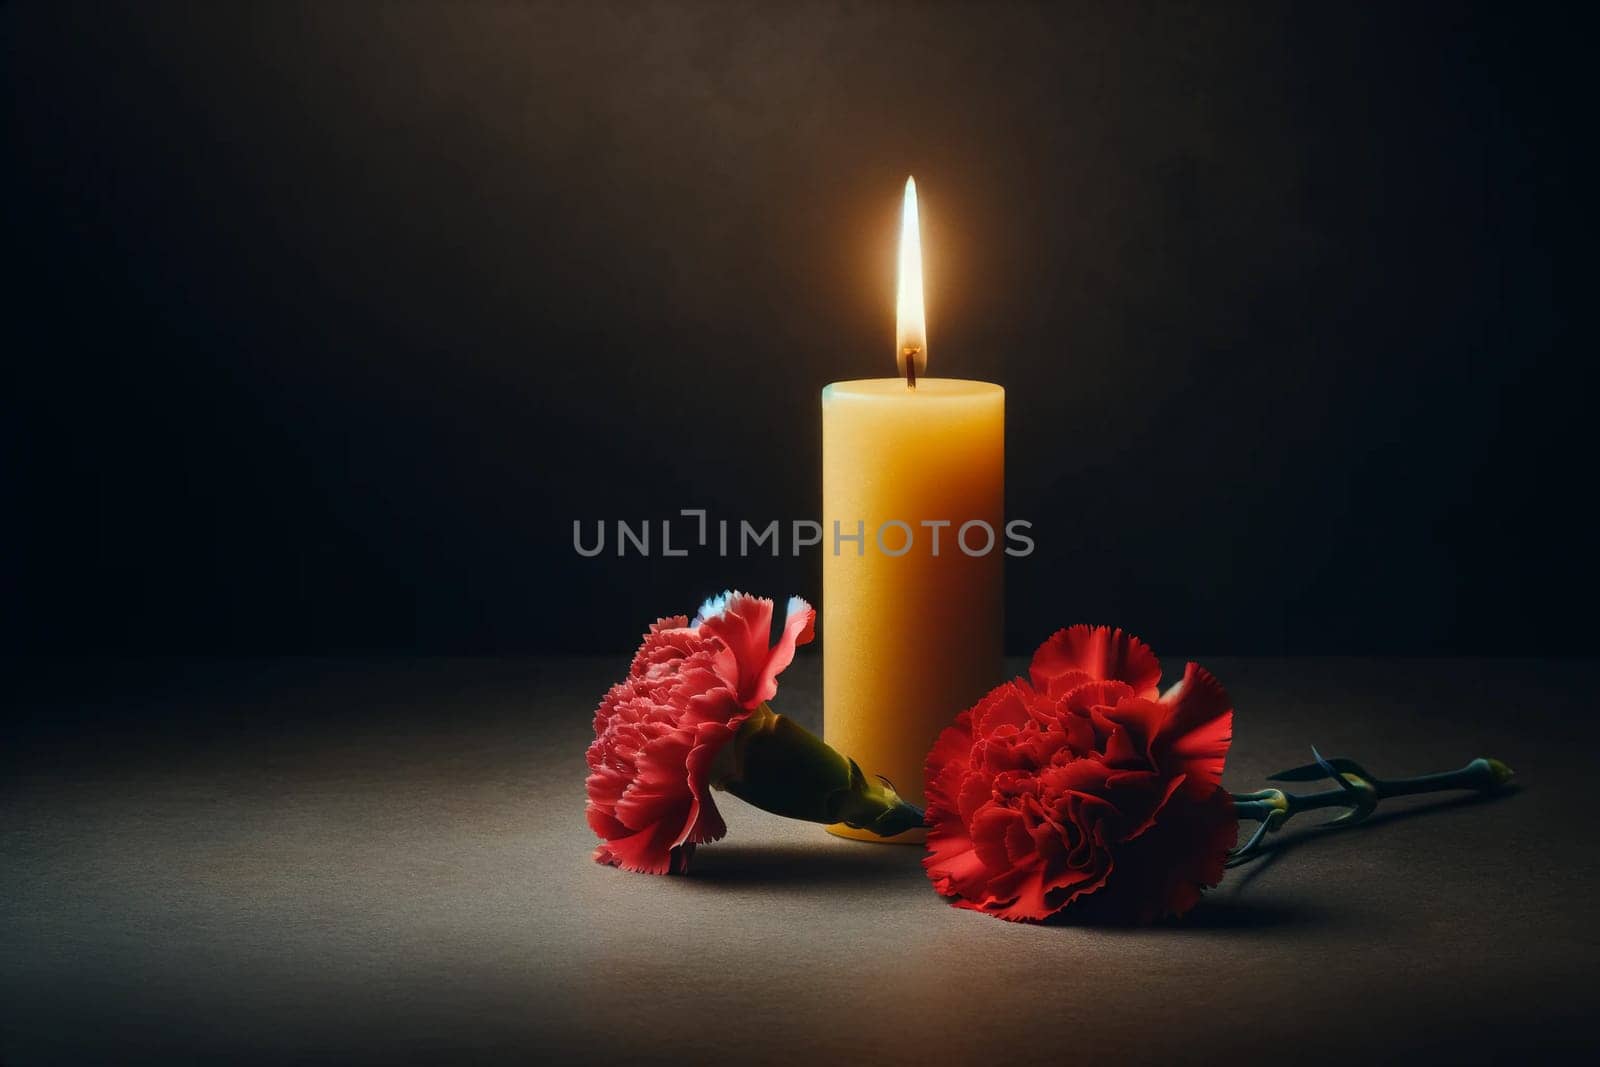 burning yellow wax candle and two red carnations on a dark background, a symbol of mourning and memory by Annado